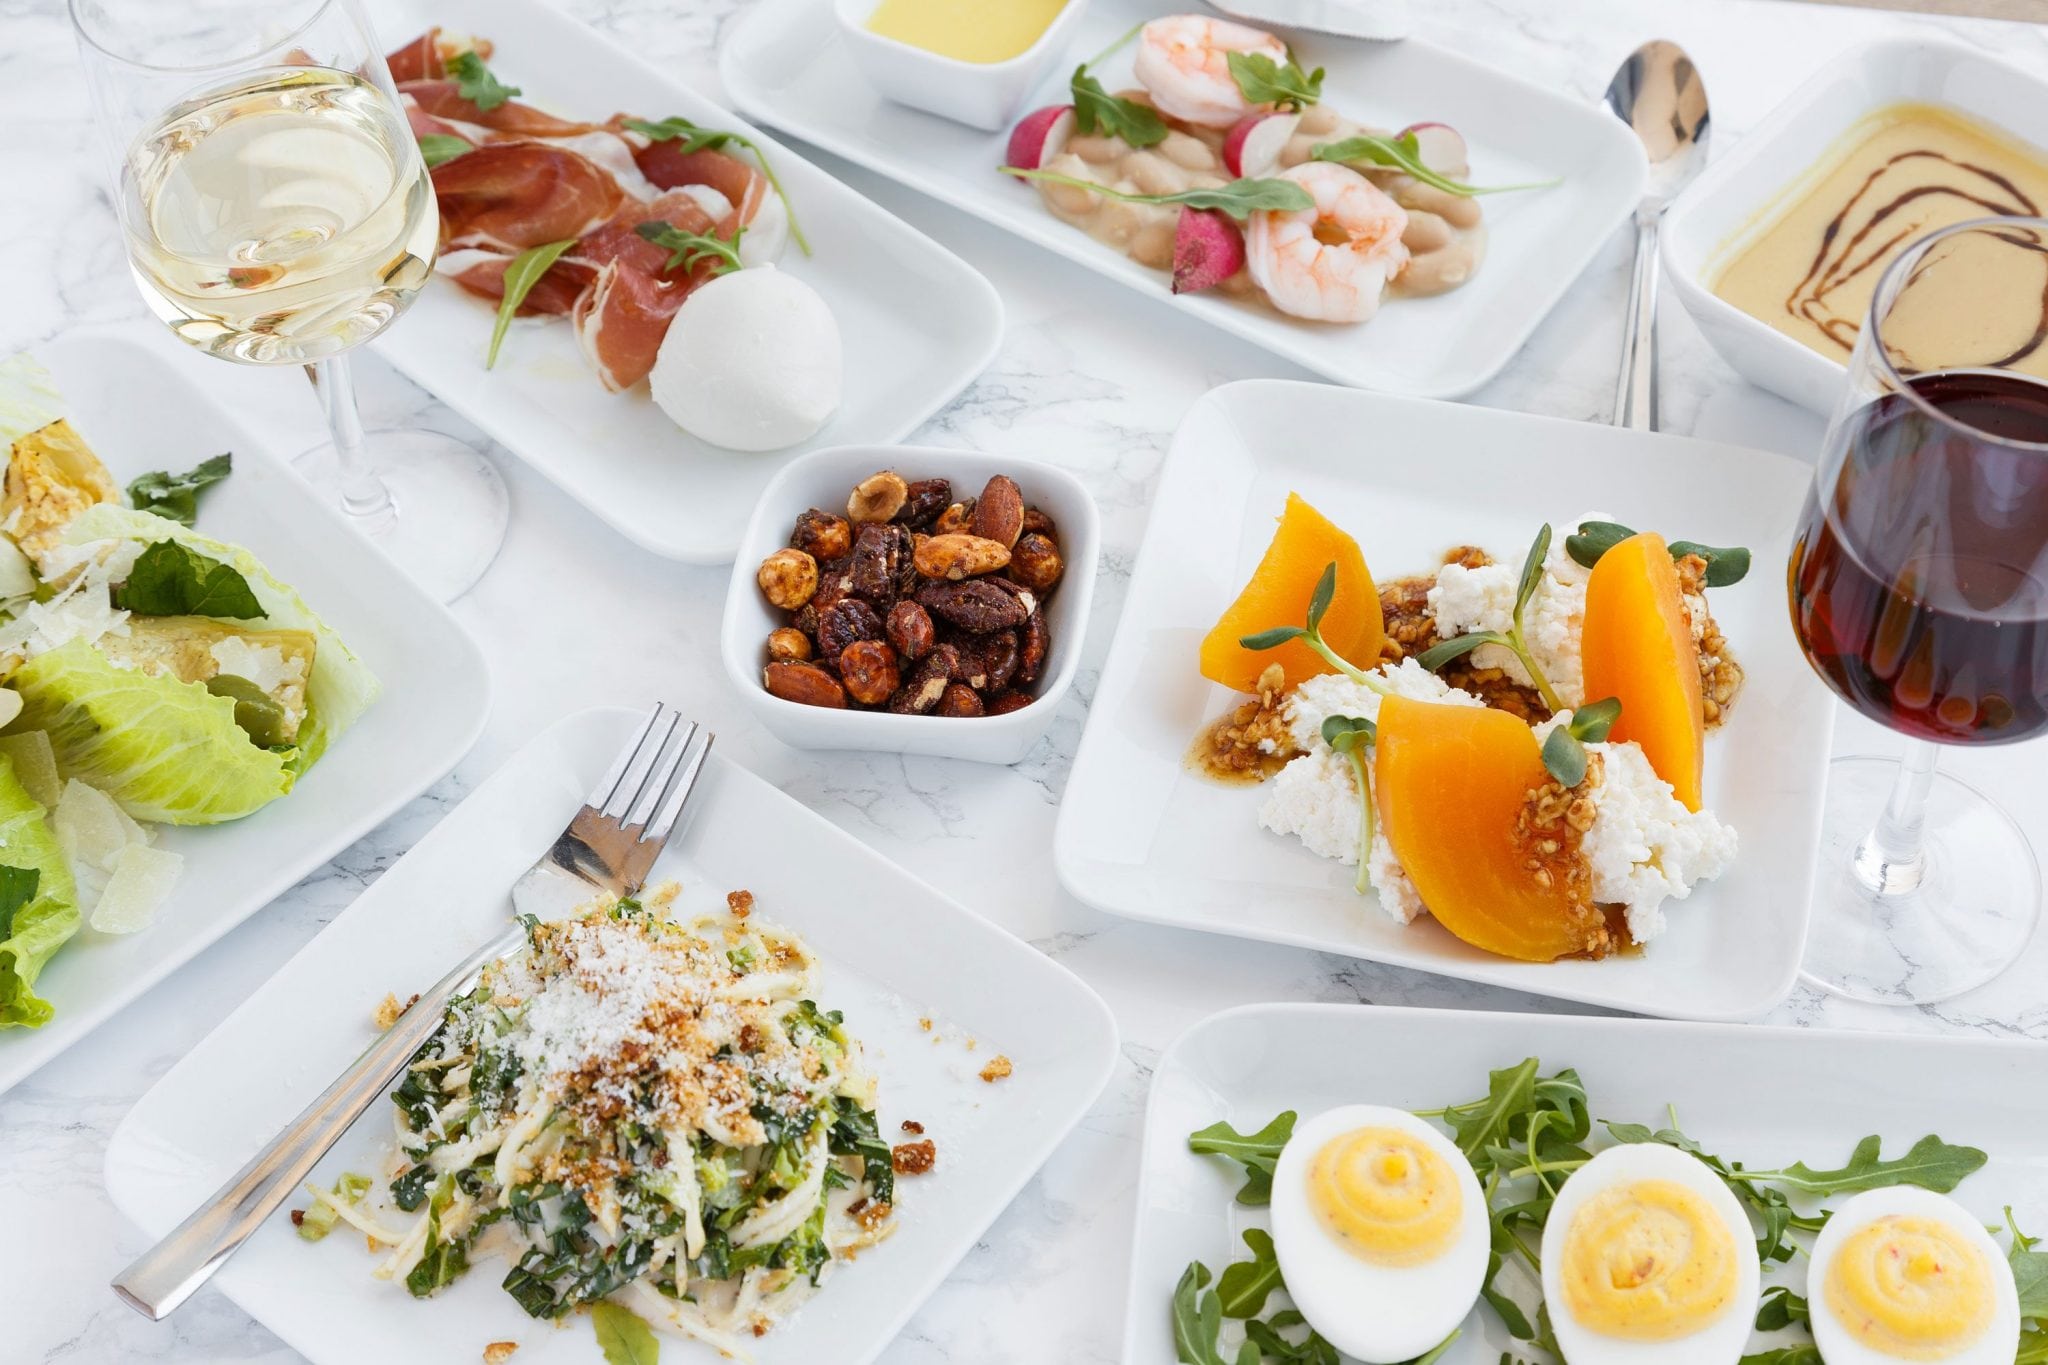 Delta Air Lines last year introduced a menu that captured the "essence of a Roman-style trattoria" for some long-haul flights. The airline is one of many investing in food for premium travelers.